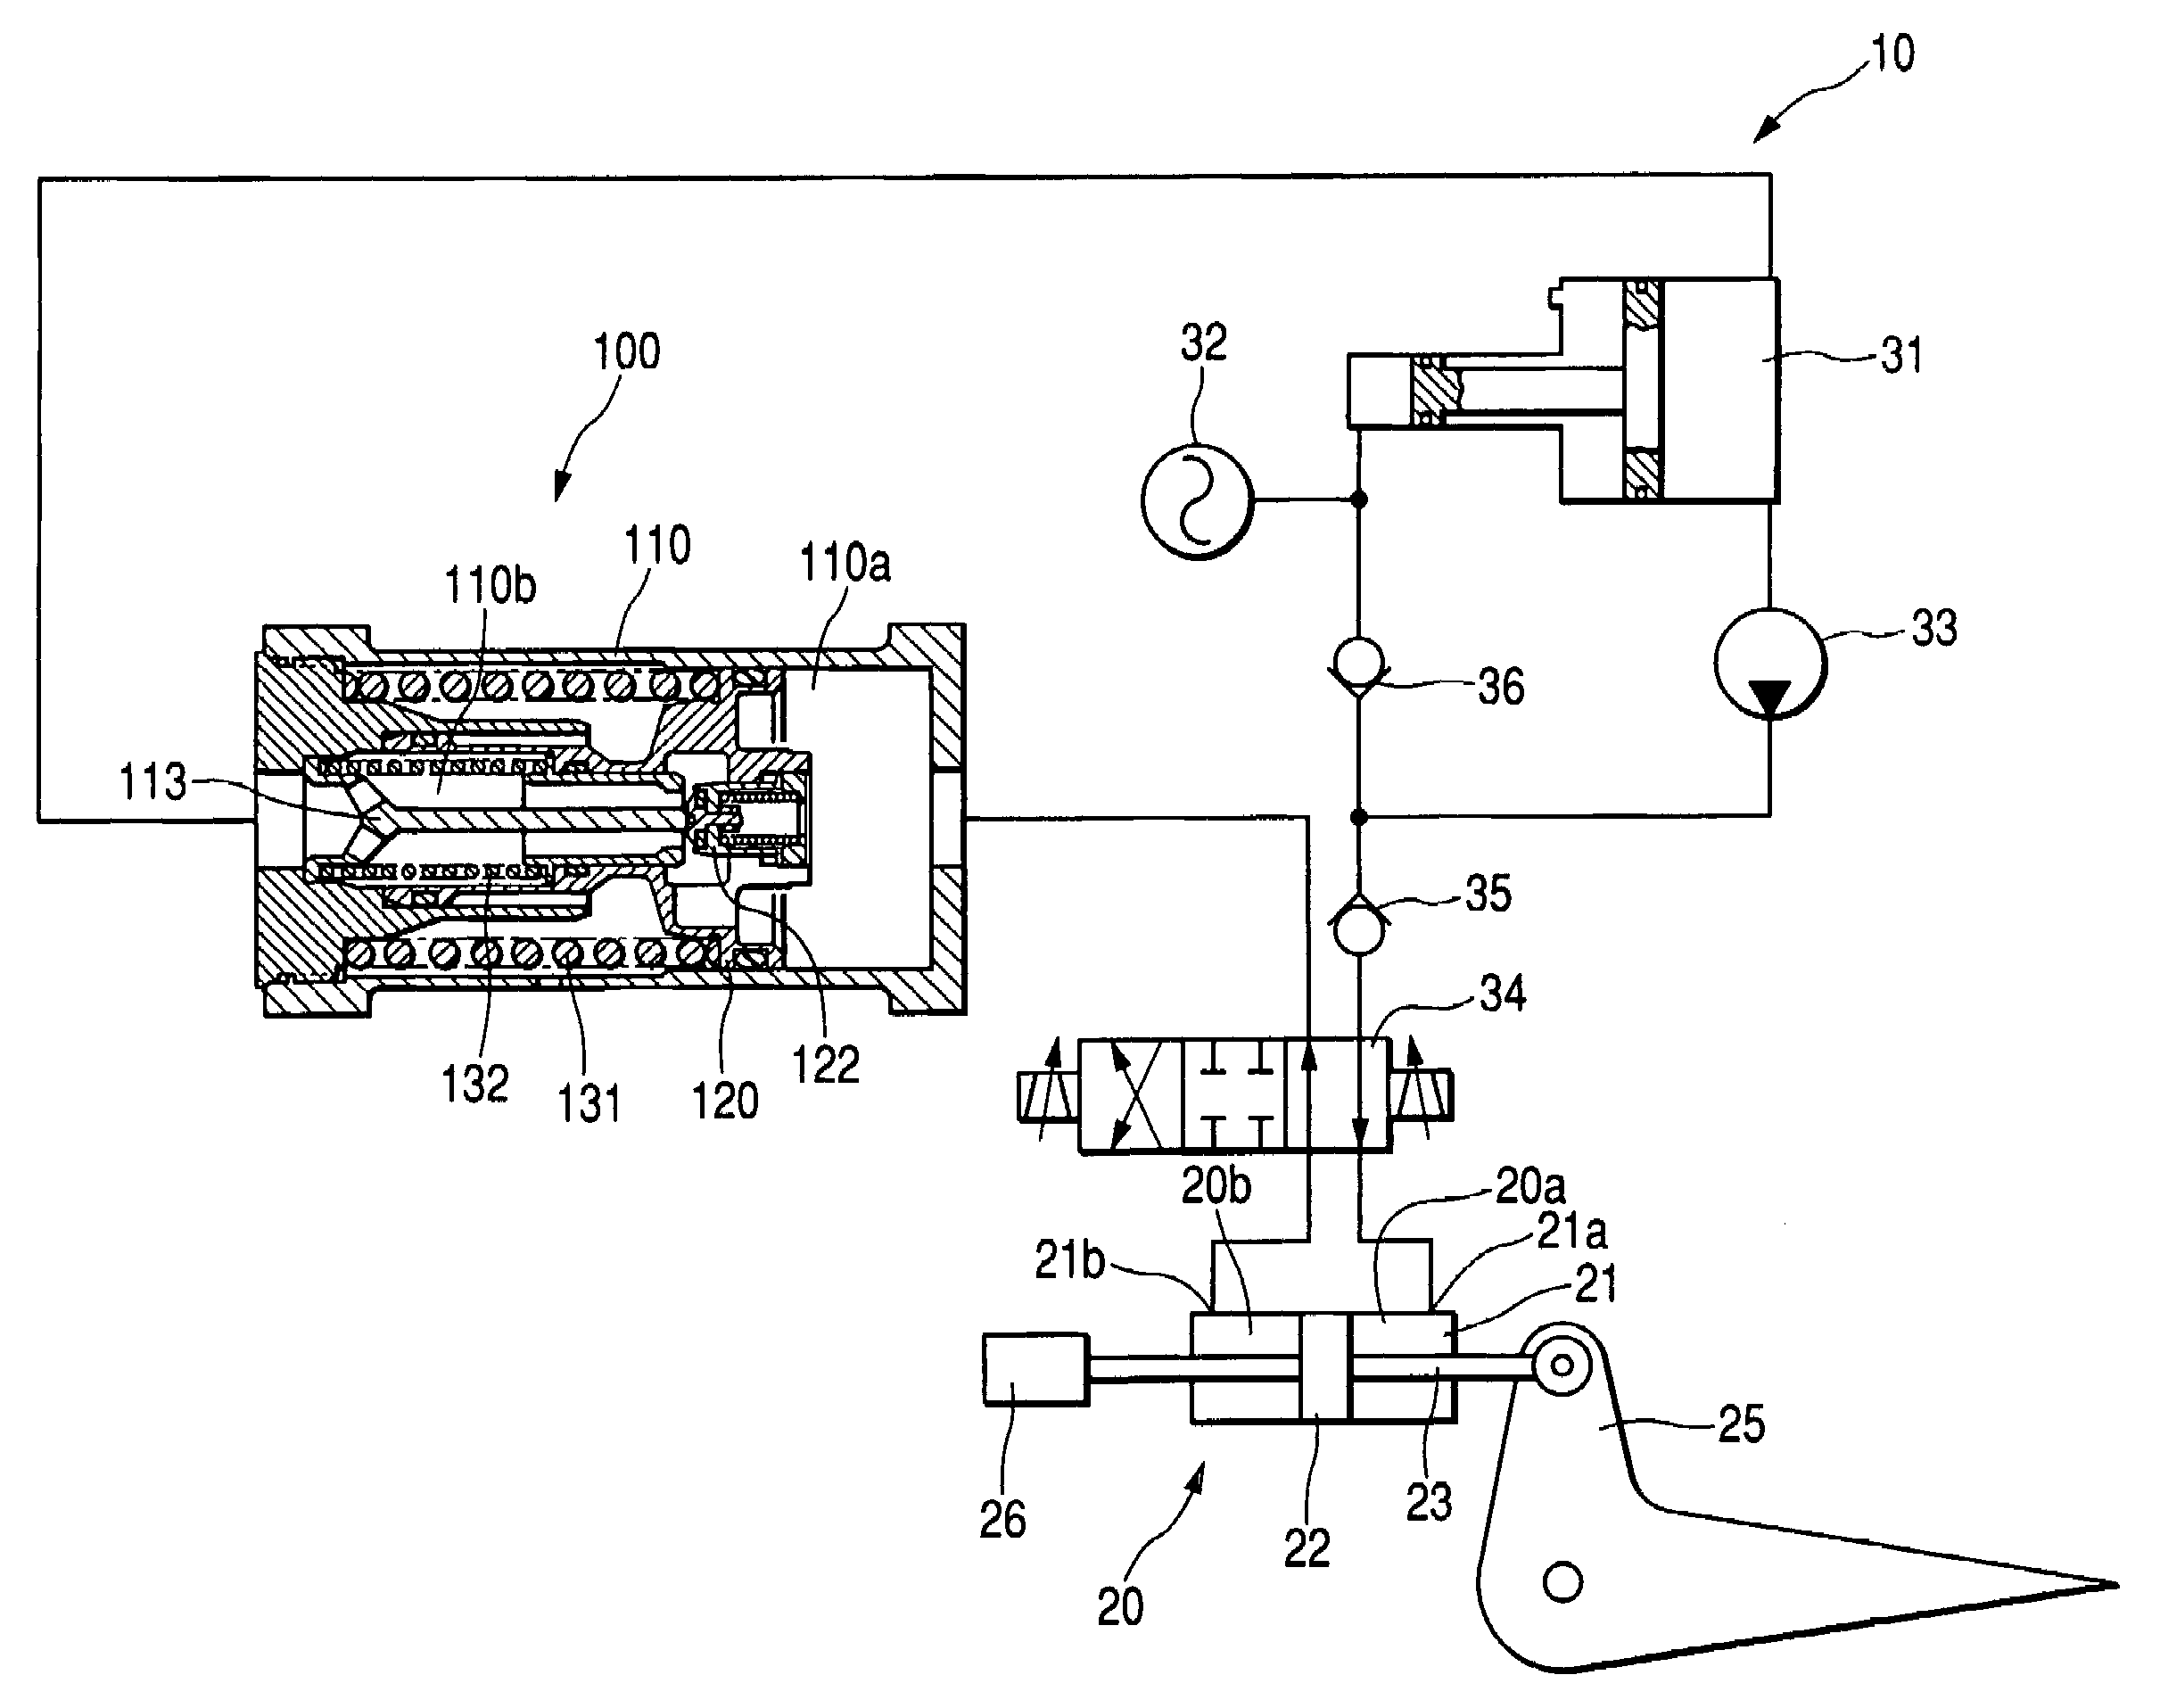 Back-pressure valve and actuation system